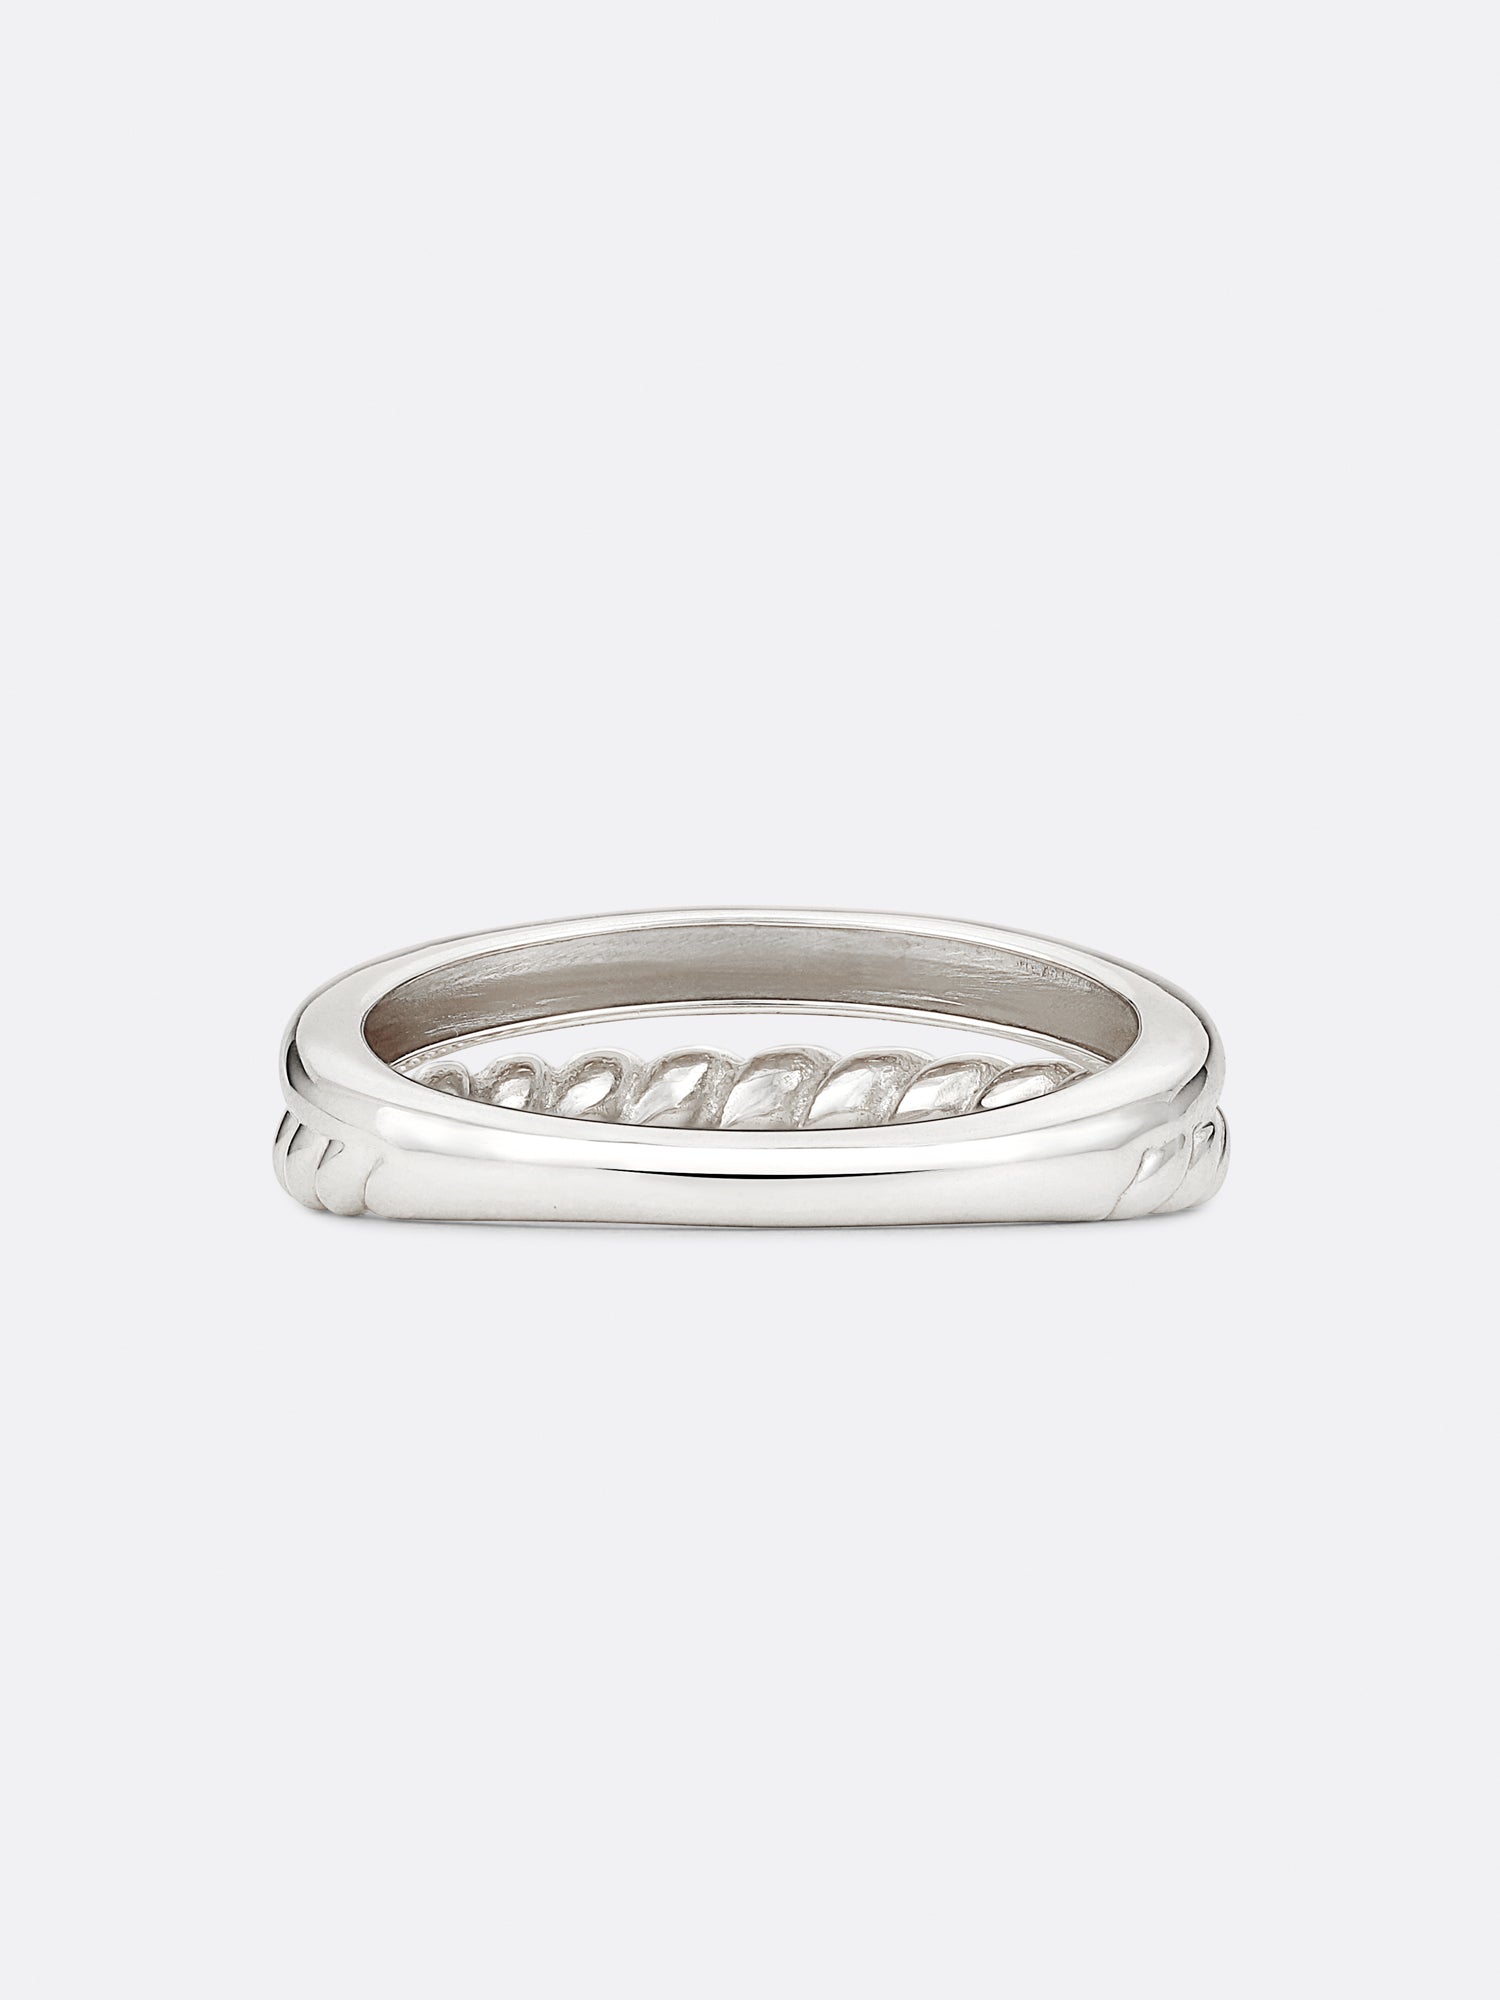 18k White gold duo band ring back view